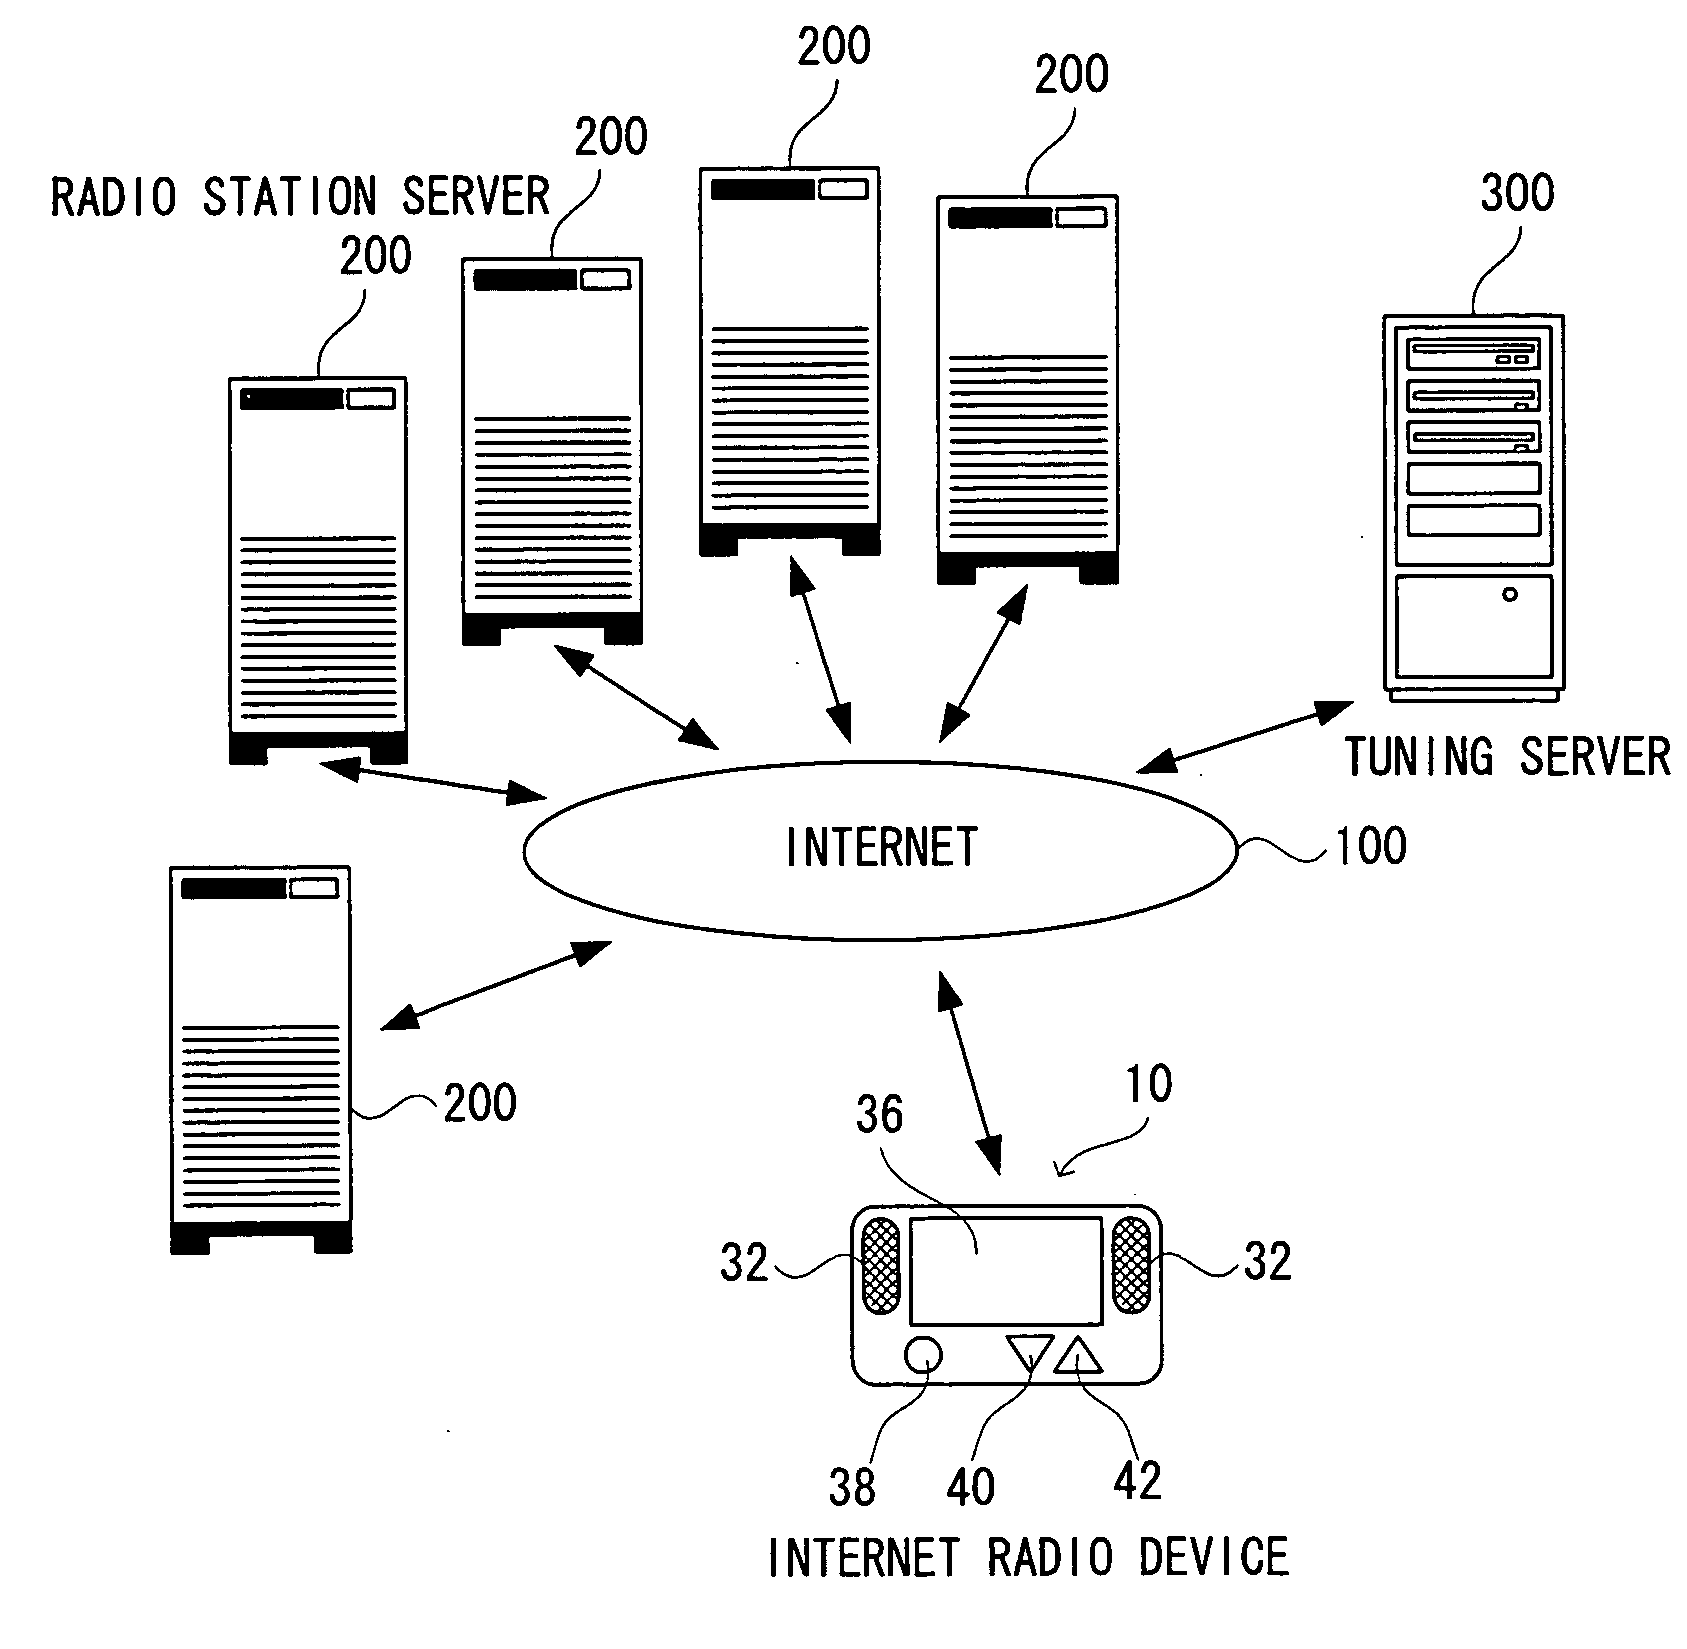 Content output device